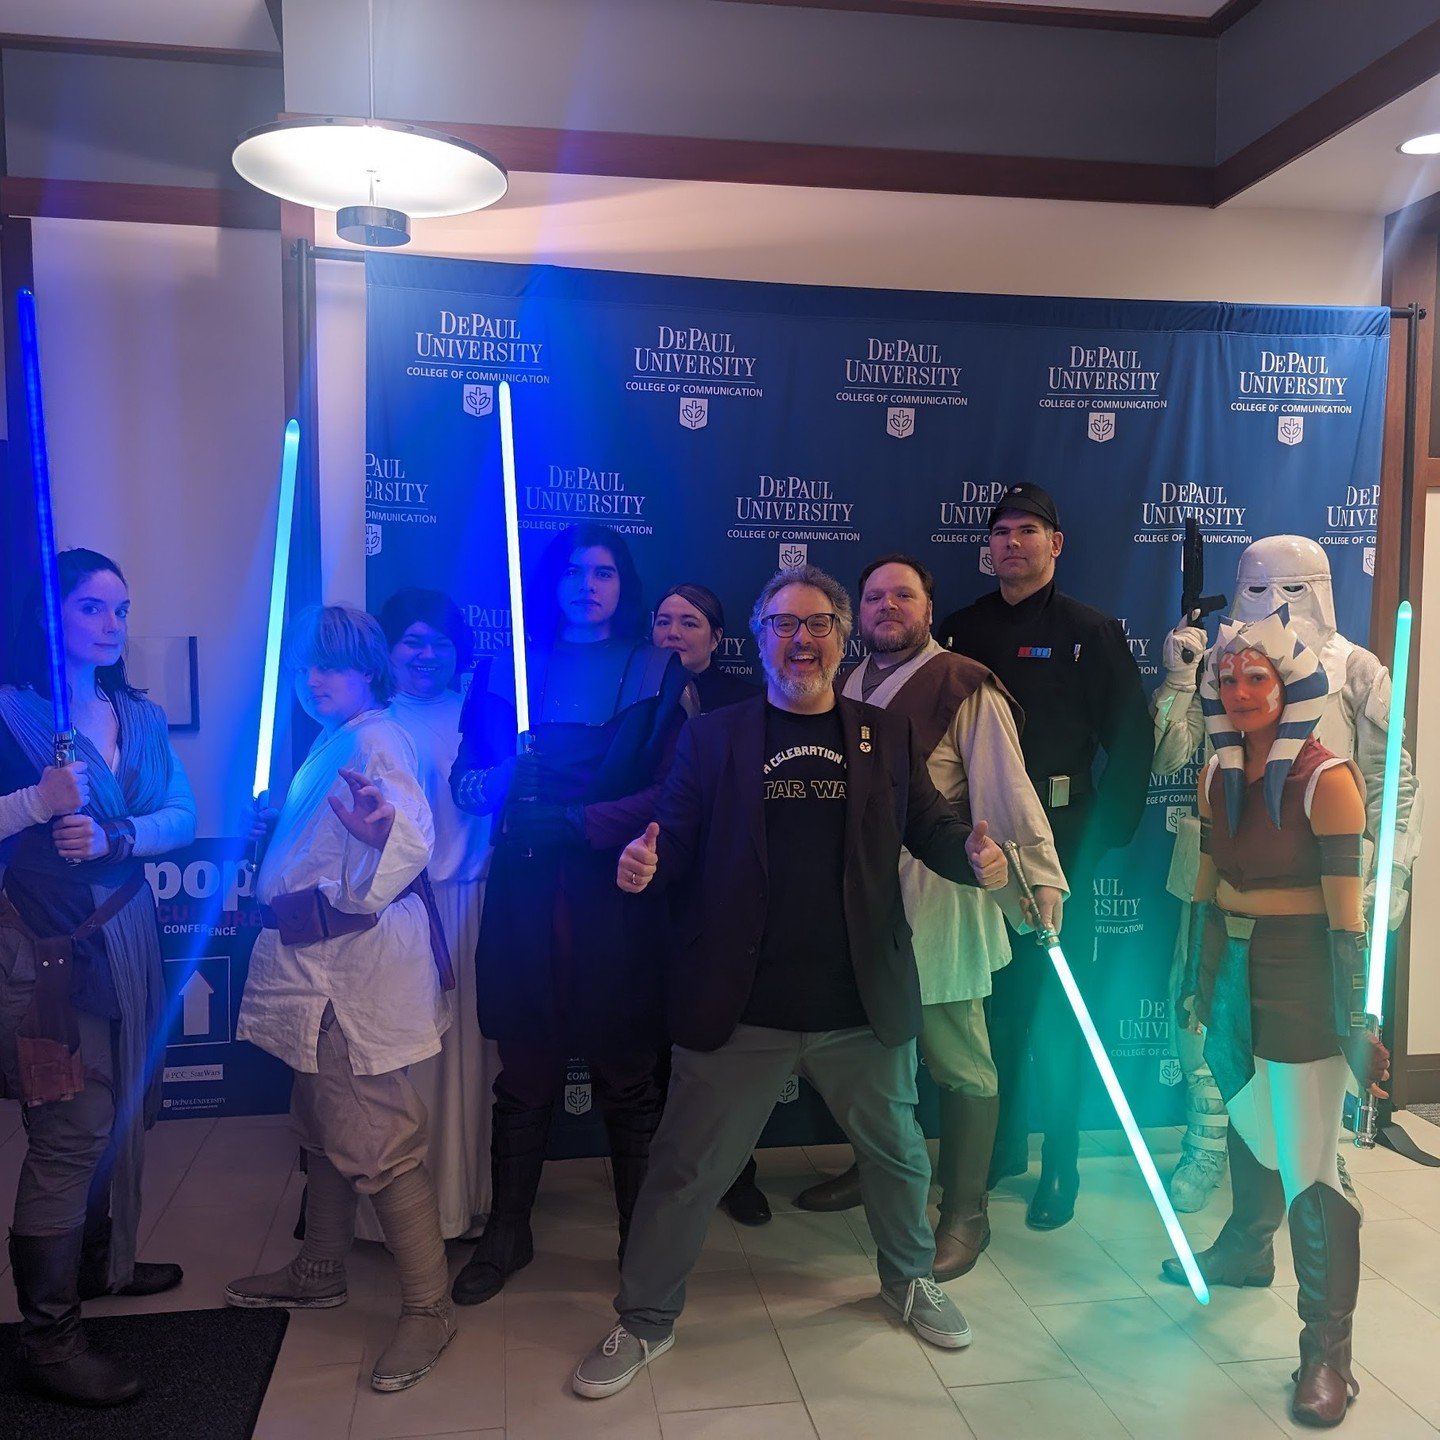 We'll do a full conference update soon (give us a day to recover!) but just wanted to announced that STAR WARS FANS ARE AWESOME and we raised over $1000 for charity at the Pop Culture Conference yesterday! May the Fourth Be With you all! @cmndepaul